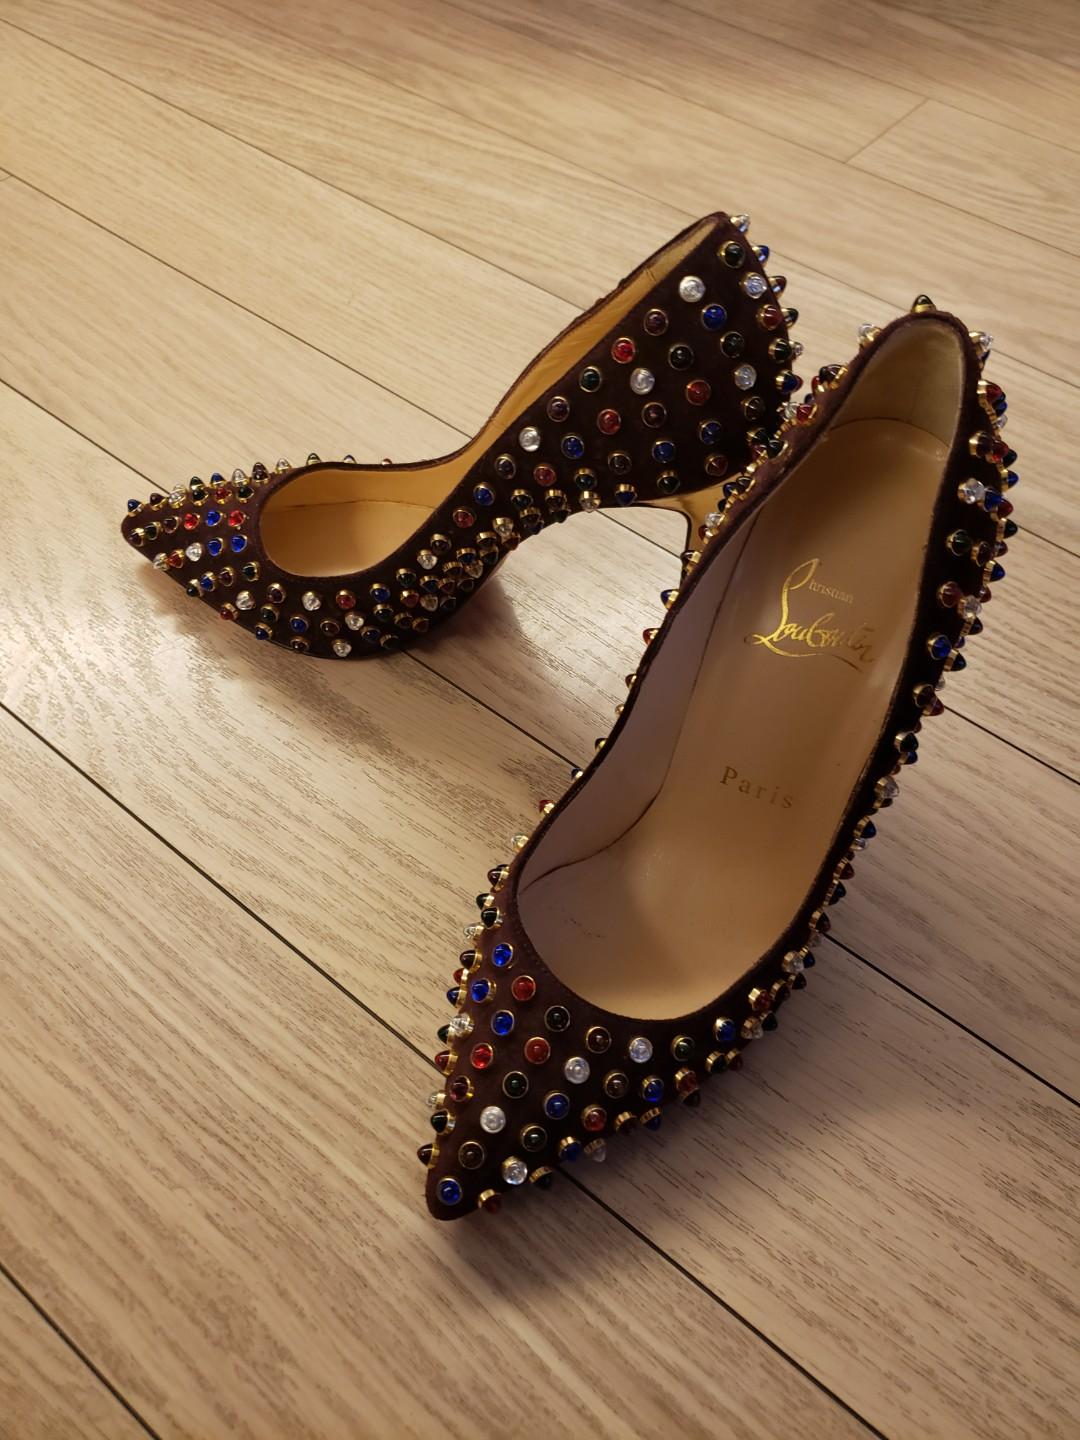 where can i buy christian louboutin shoes